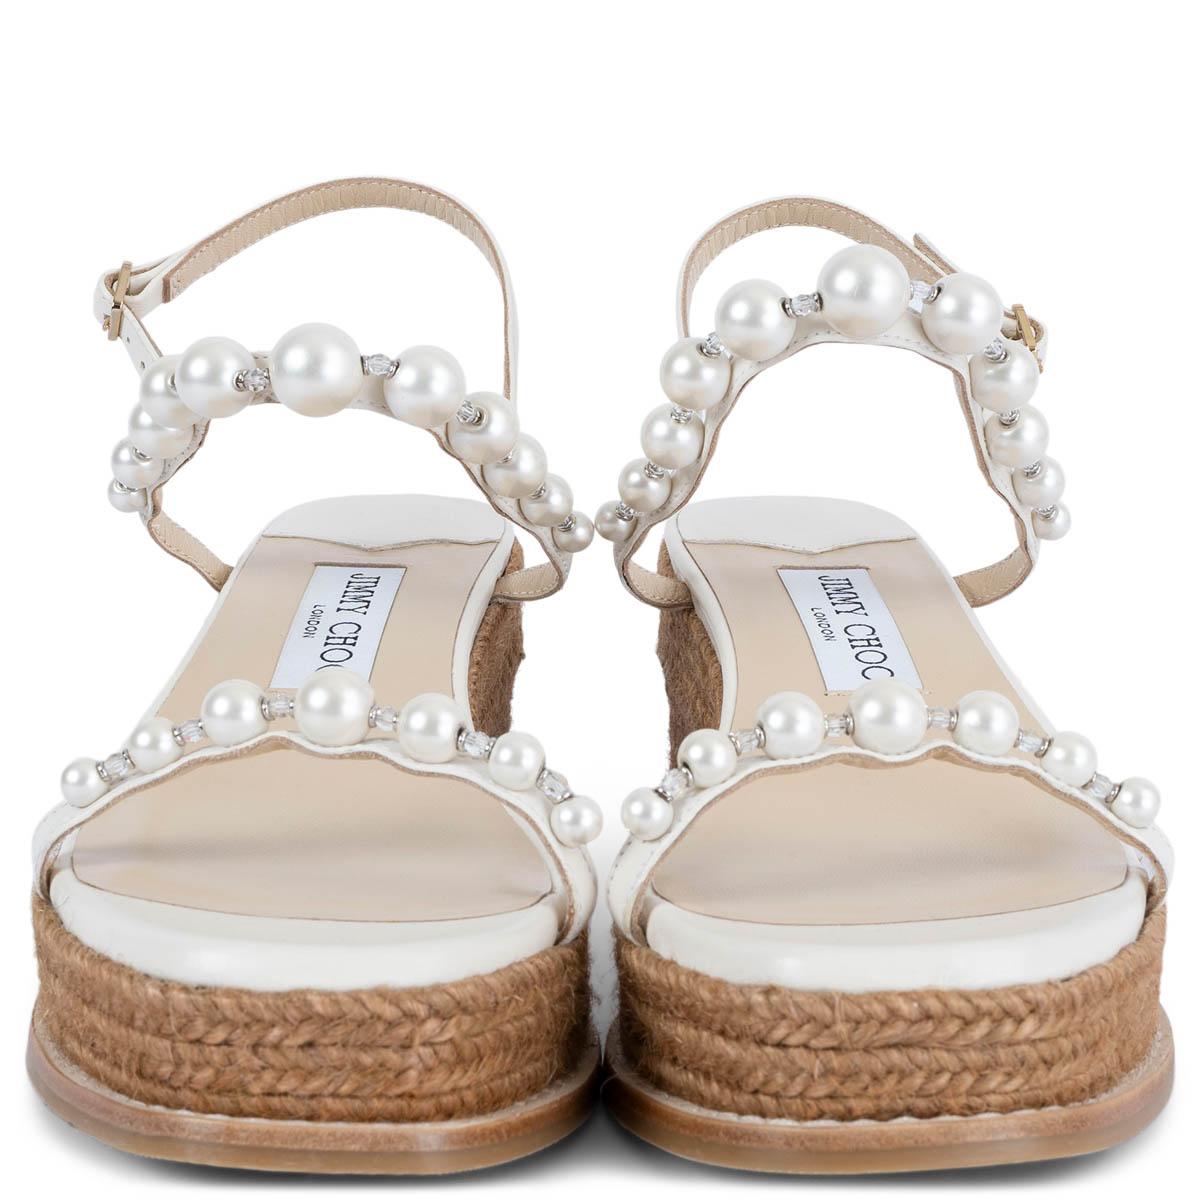 100% authentic Jimmy Choo Amatuus 60 pearl embellished wedge sandals in white Nappa leather and camel raffia sole. Brand new.

Measurements
Imprinted Size	37.5
Shoe Size	37.5
Inside Sole	24cm (9.4in)
Width	8cm (3.1in)
Heel	6cm (2.3in)
Platform:	3cm